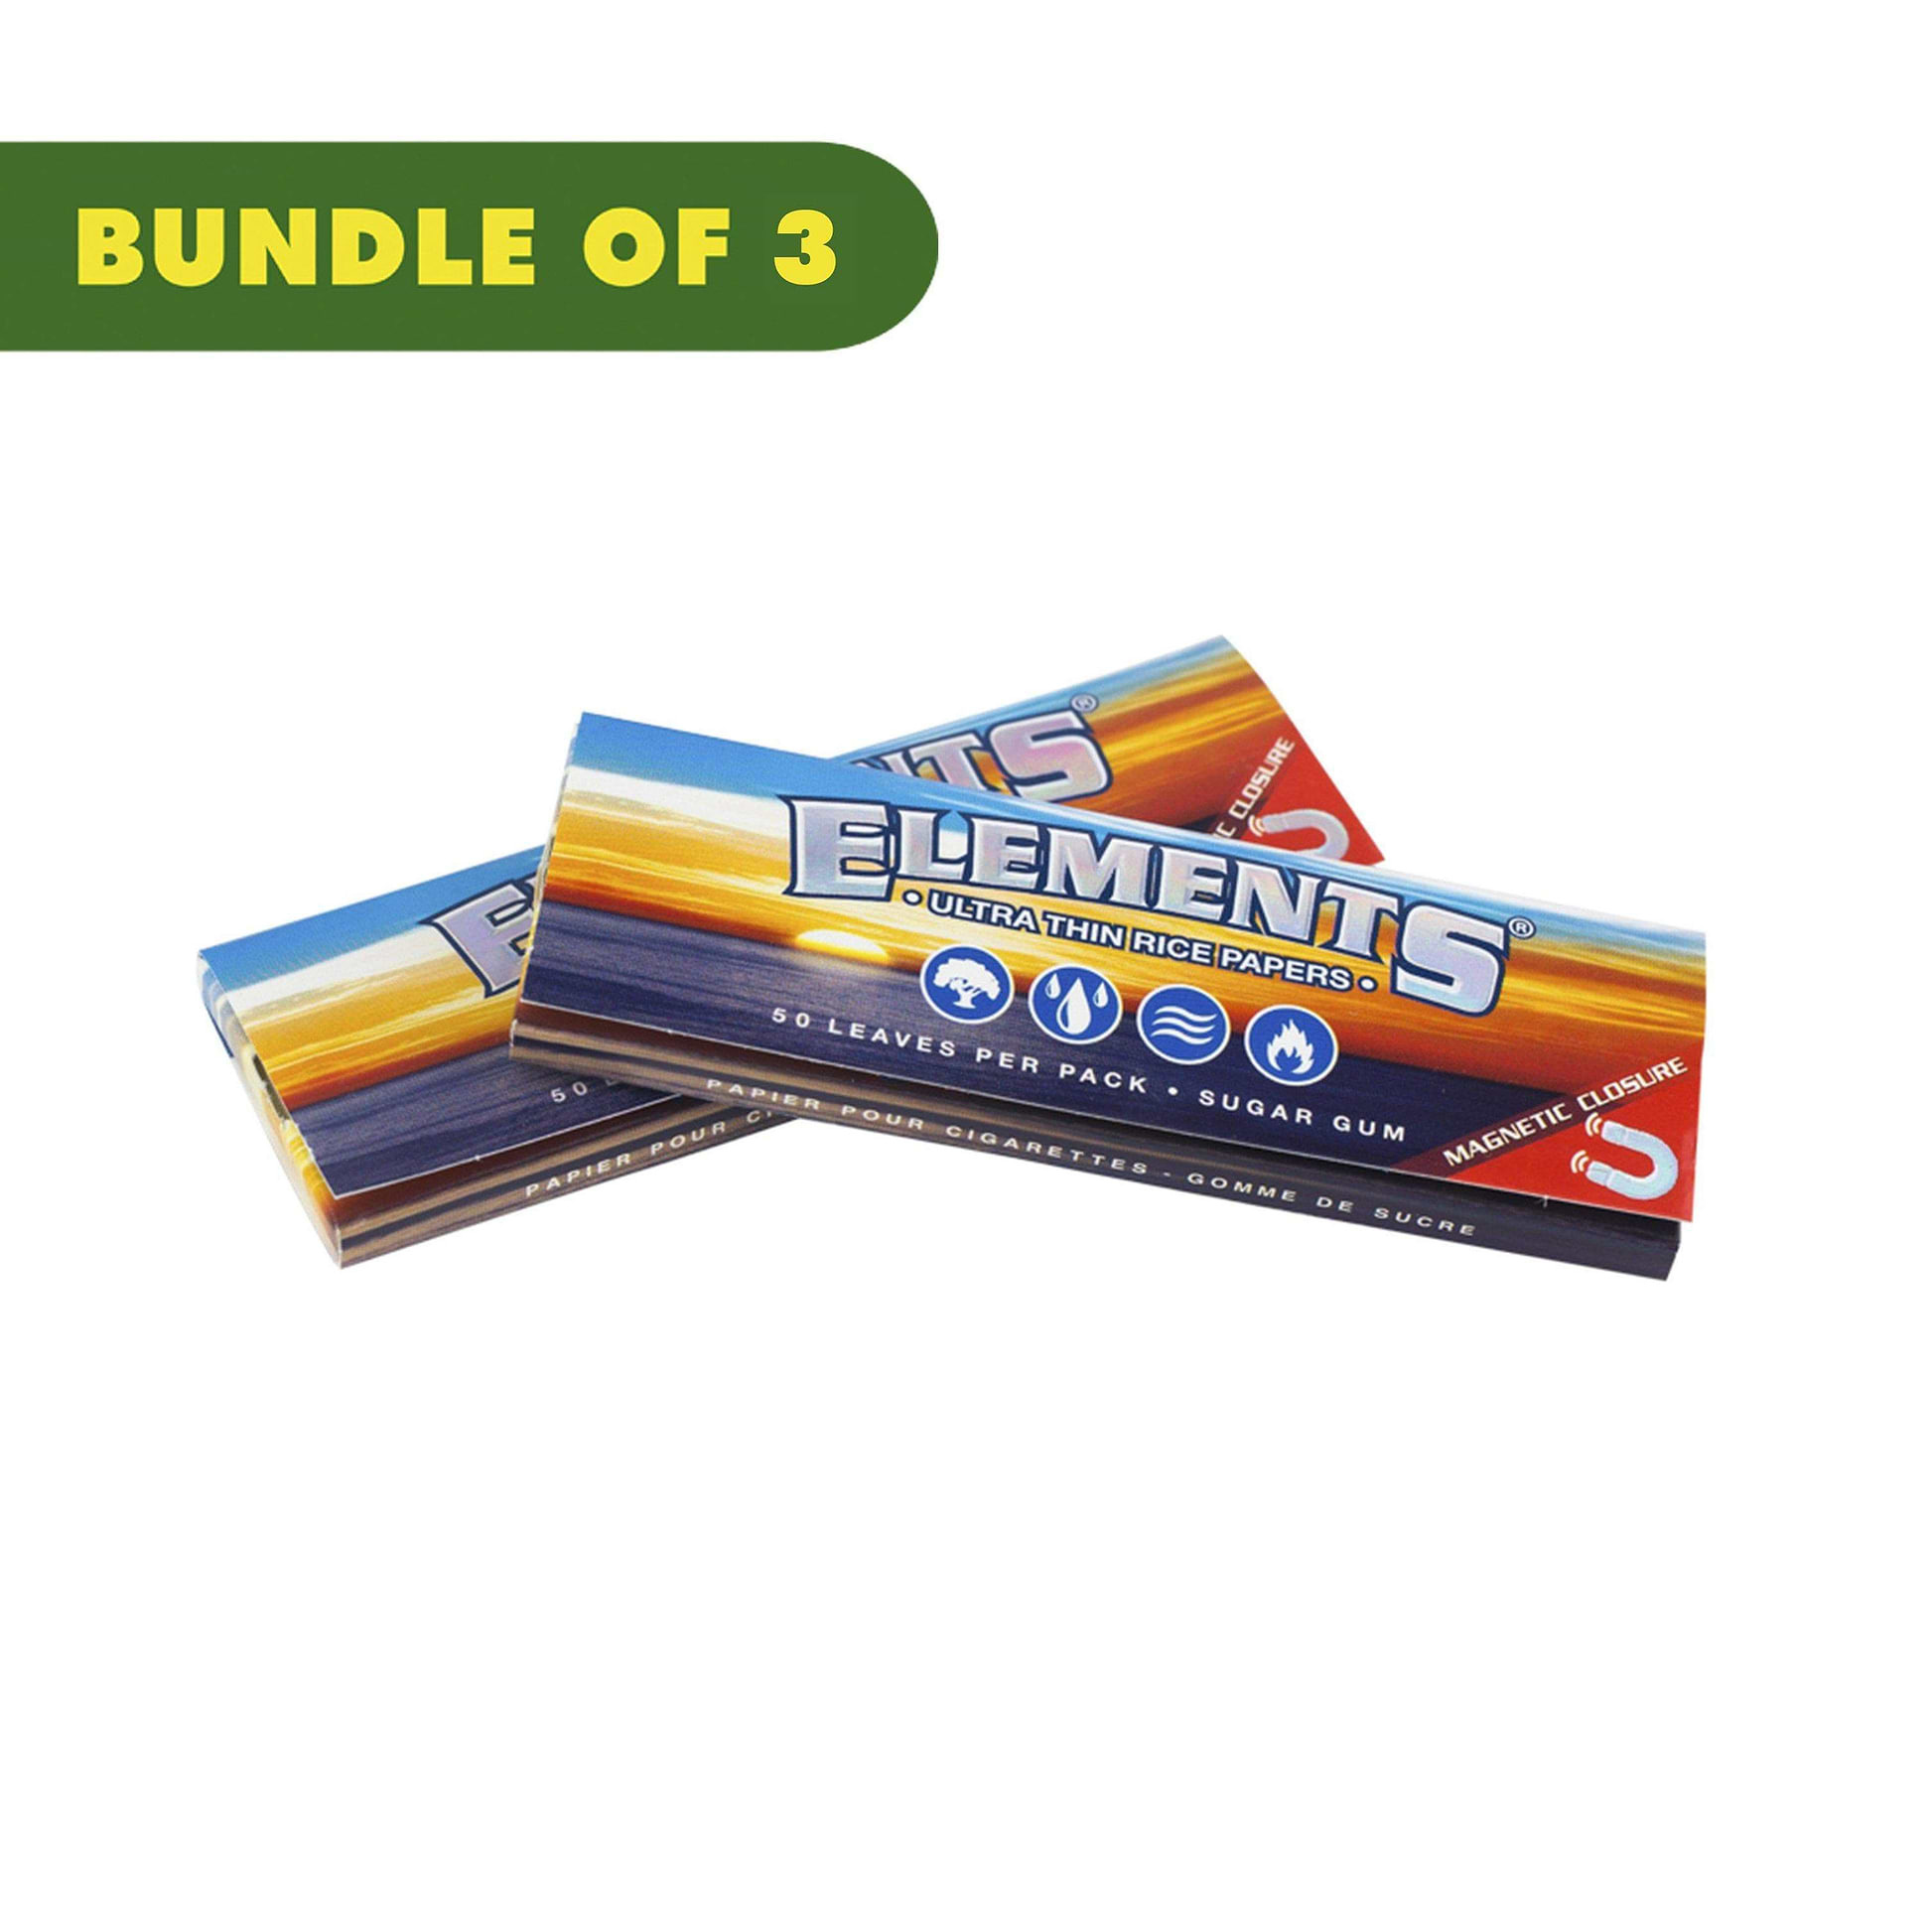 2 packs 1 1/4 rolling paper smoking accessory with classic Elements logo ocean and sunset image